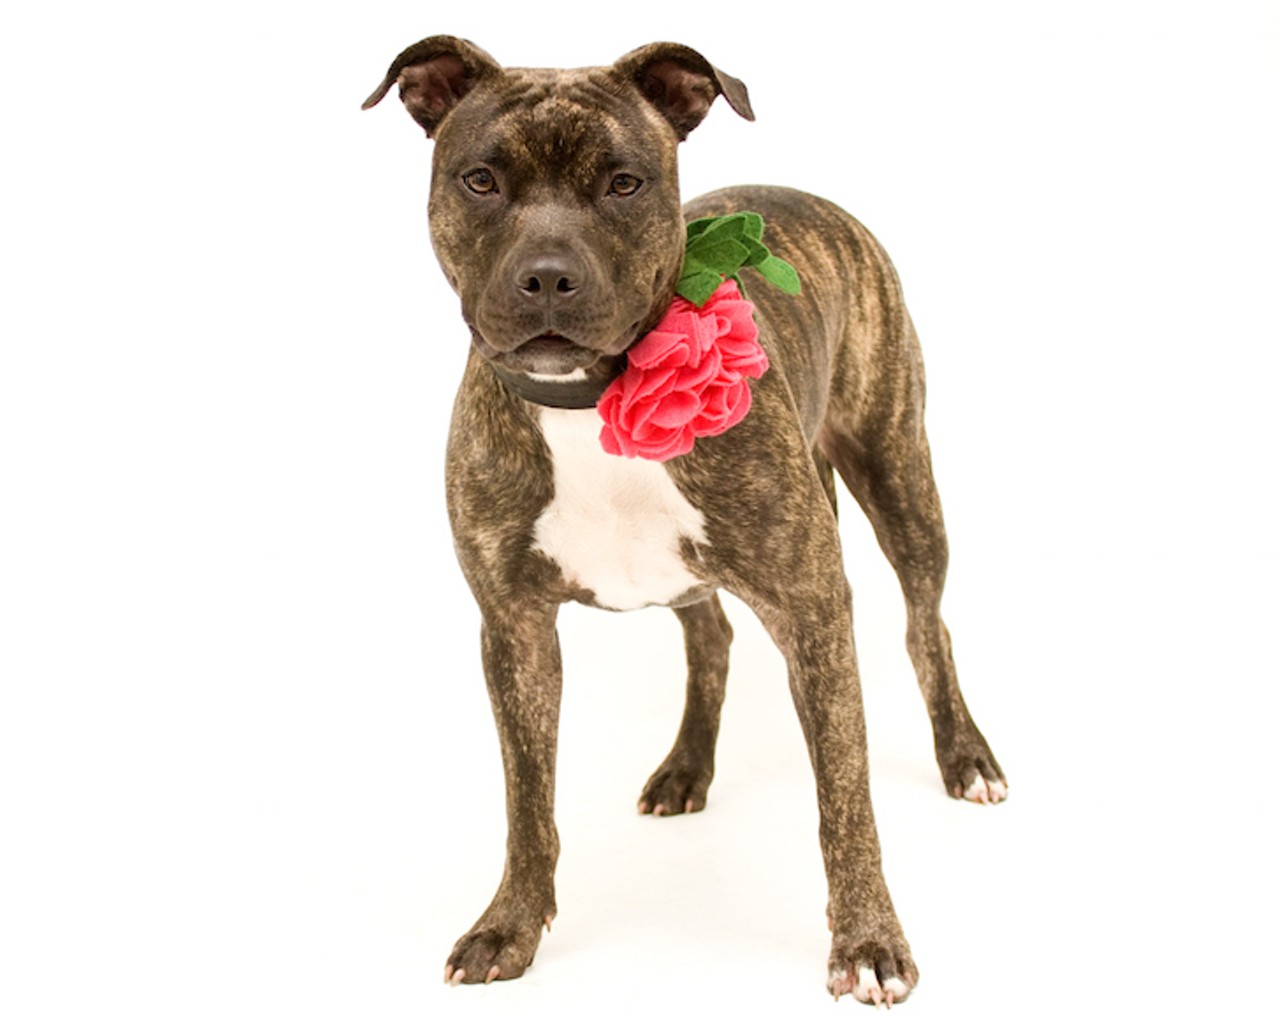 21 adorable dogs up for adoption right now at Orange County Animal Services